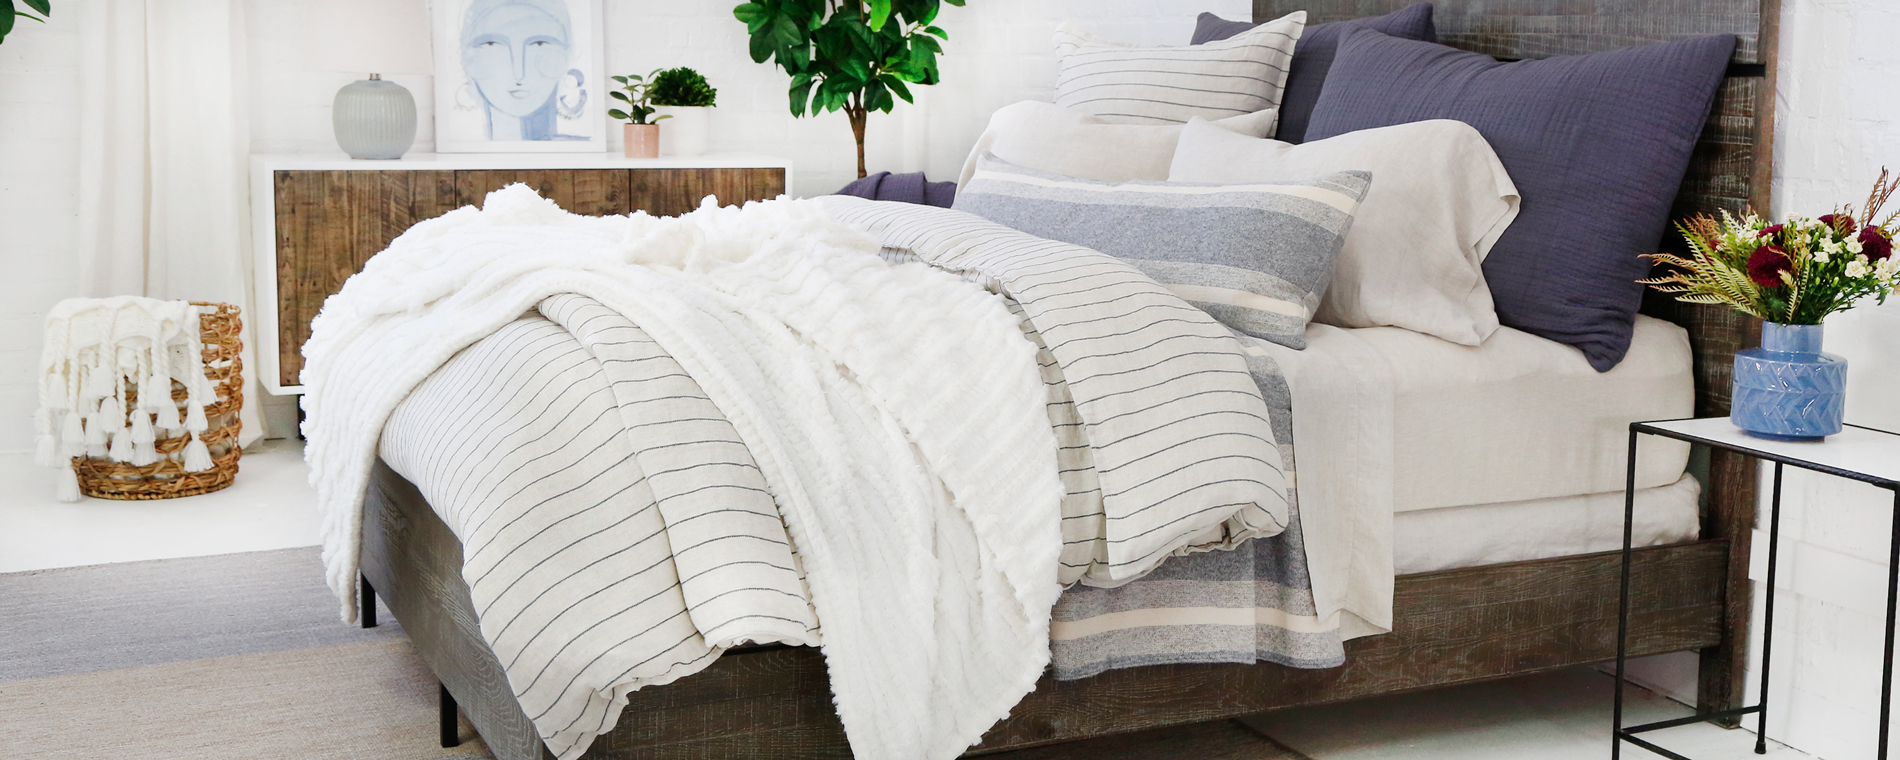 How to Layer A Bed for Fall!